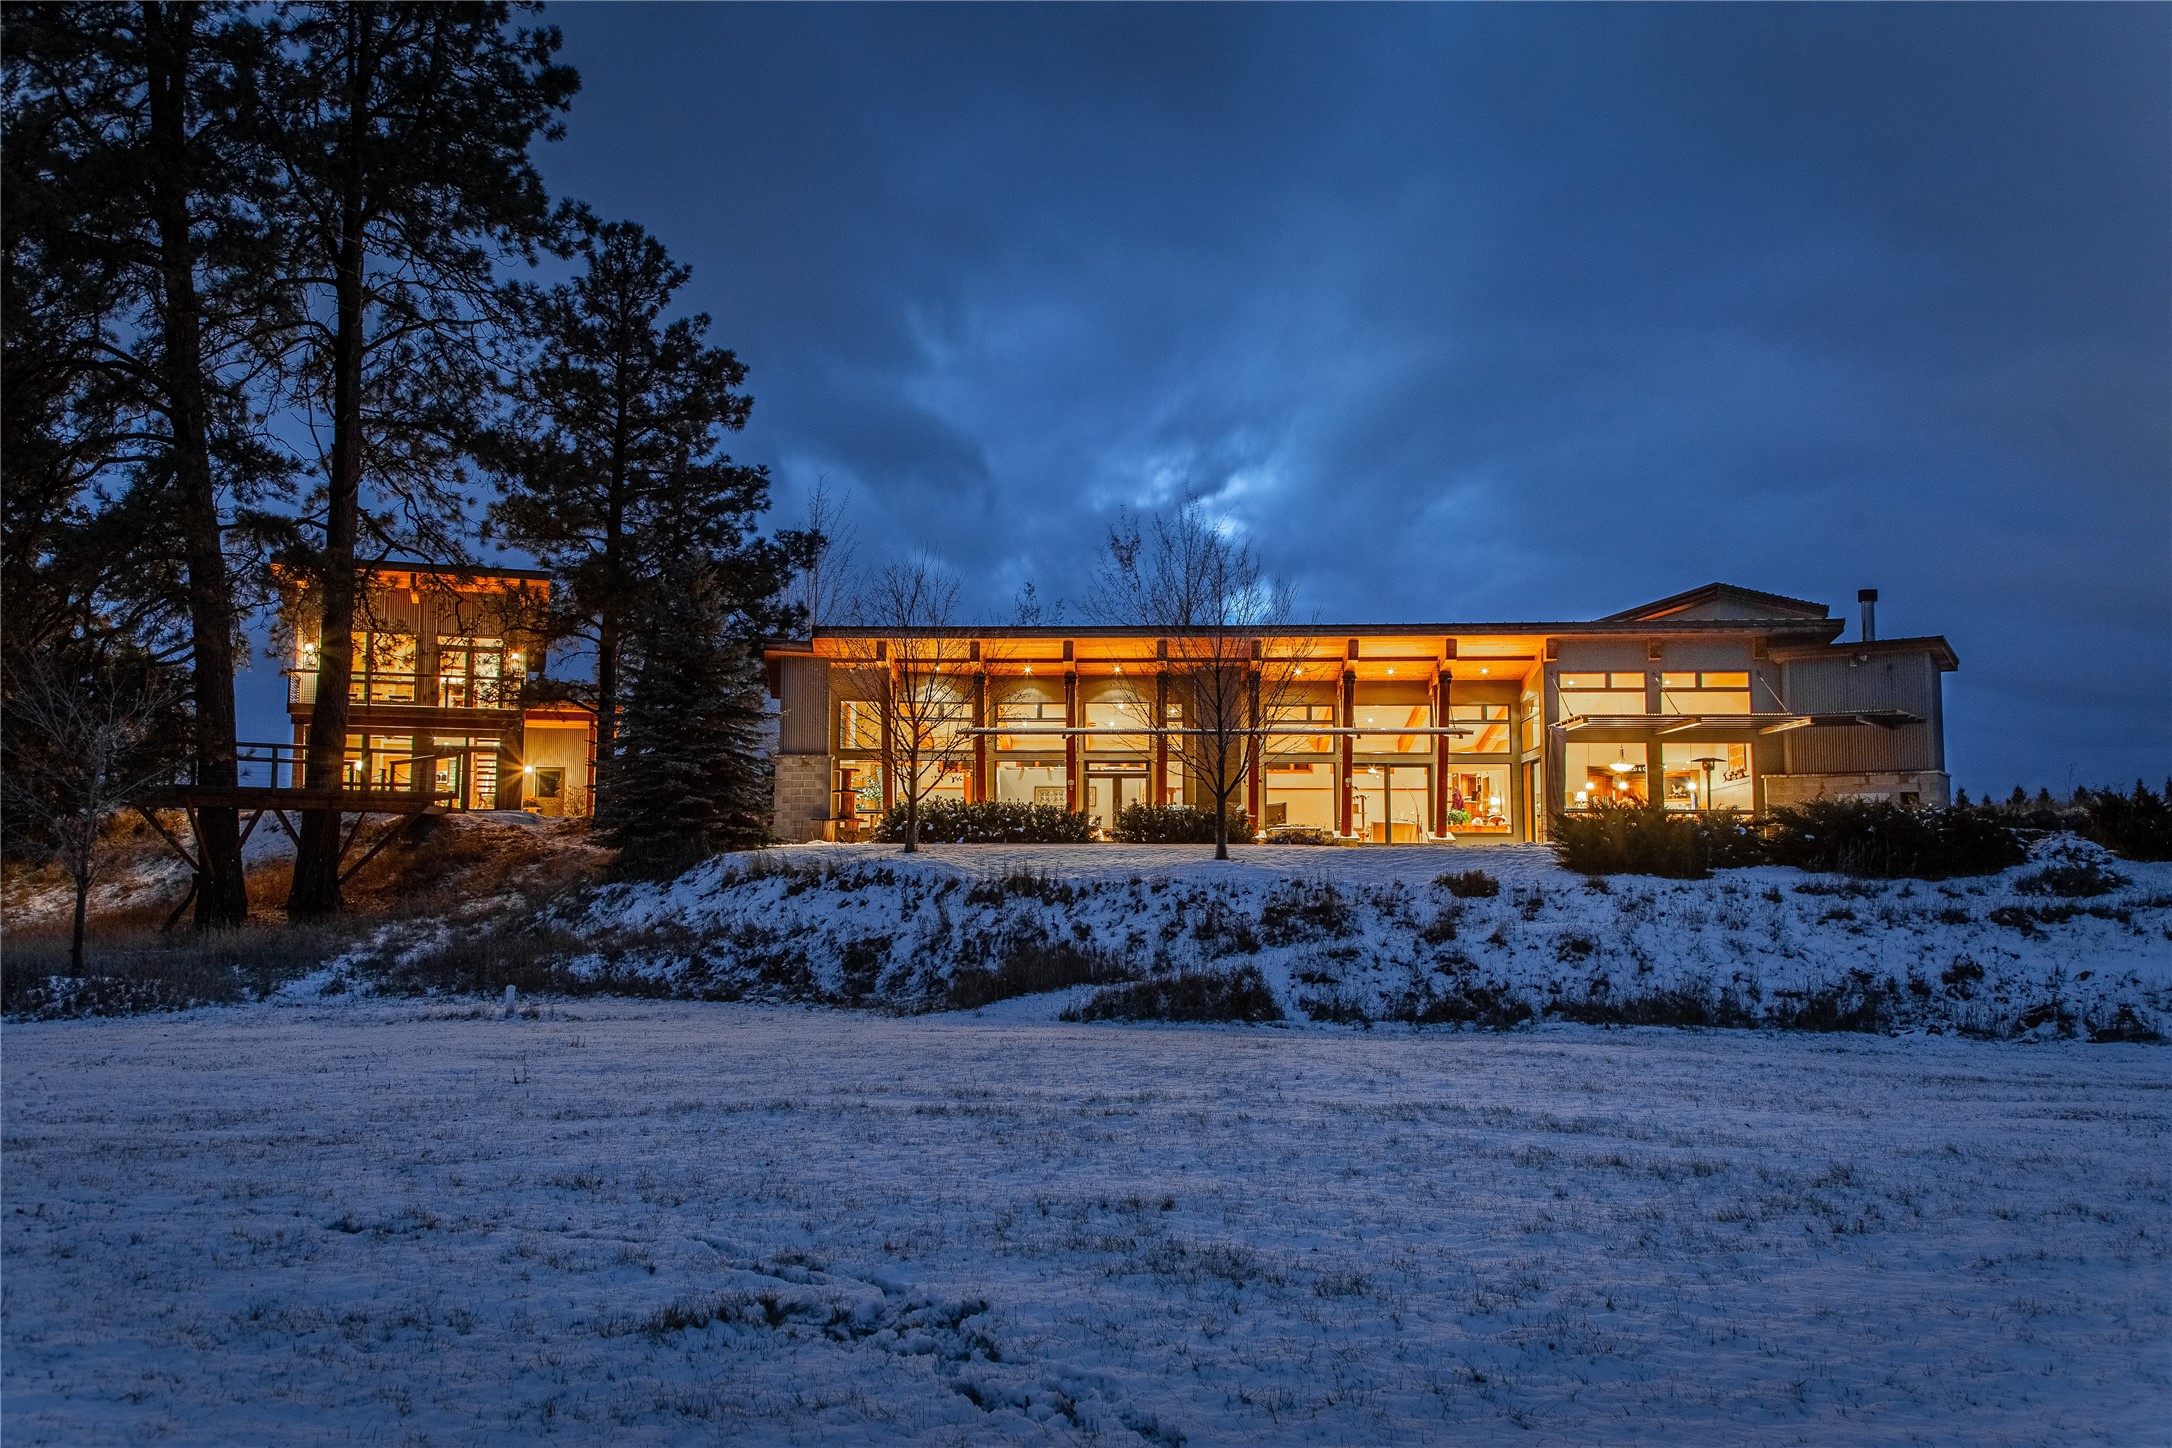 Embrace the ultimate Montana lifestyle with this 17-acre sanctuary featuring 954+/- feet of Whitefish River frontage & breathtaking views of the Whitefish & Jewel Basin Mountains. This property is not just a home; it's a personal retreat where you can hunt, build tree stands, fish, cross-country ski, golf, & garden—all on your own land. Live contemporary elegance in this architecturally stunning home, with high beamed ceilings & large windows that fill the space with natural light & showcase the surrounding natural beauty. The open floor plan is designed for entertaining with two of the home's four fireplaces. Enjoy the convenience of single-level living with a primary bedroom featuring a spa-like ensuite bathroom, & a ground-floor laundry. Stay comfortable year-round with radiant heated floors, natural gas, & the reliability of two generators. Contact Kelly Rigg @ 406-382-9518 or your real estate professional. Additional structures include a chic guest house, a heated shop/office with a separate mailing address for remote work, a quonset, a greenhouse, & a deer-fenced garden, offering plentiful room for expansion. 

Centrally positioned, this home offers both seclusion & accessibility, conveniently close to Whitefish, Kalispell, Glacier, and Glacier International Airport. It's ideal for running errands, recreating on nearby mountains, rivers, lakes, and golf courses, or enjoying a meal "in town" with friends and family.

MLS only shows one parcel, but this property is comprised of two parcels totally 17 +/- acres, see attached docs for reference.

The refrigerator located in the garage 'bonus room' and the freezer in the mudroom are not included in the sale.